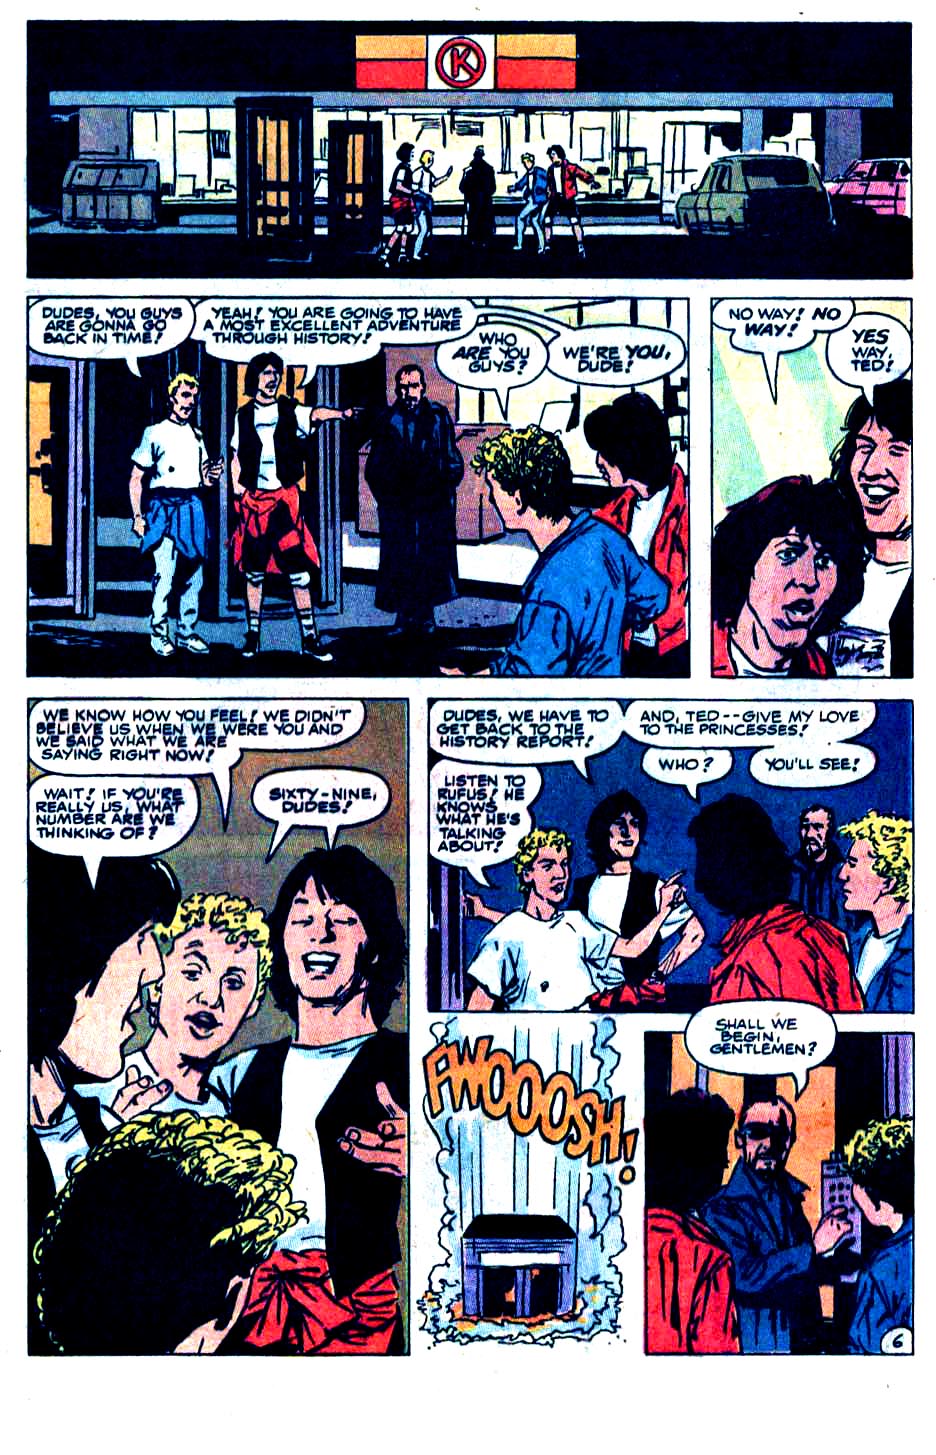 Read online Bill & Ted's Excellent Adventure comic -  Issue # Full - 6